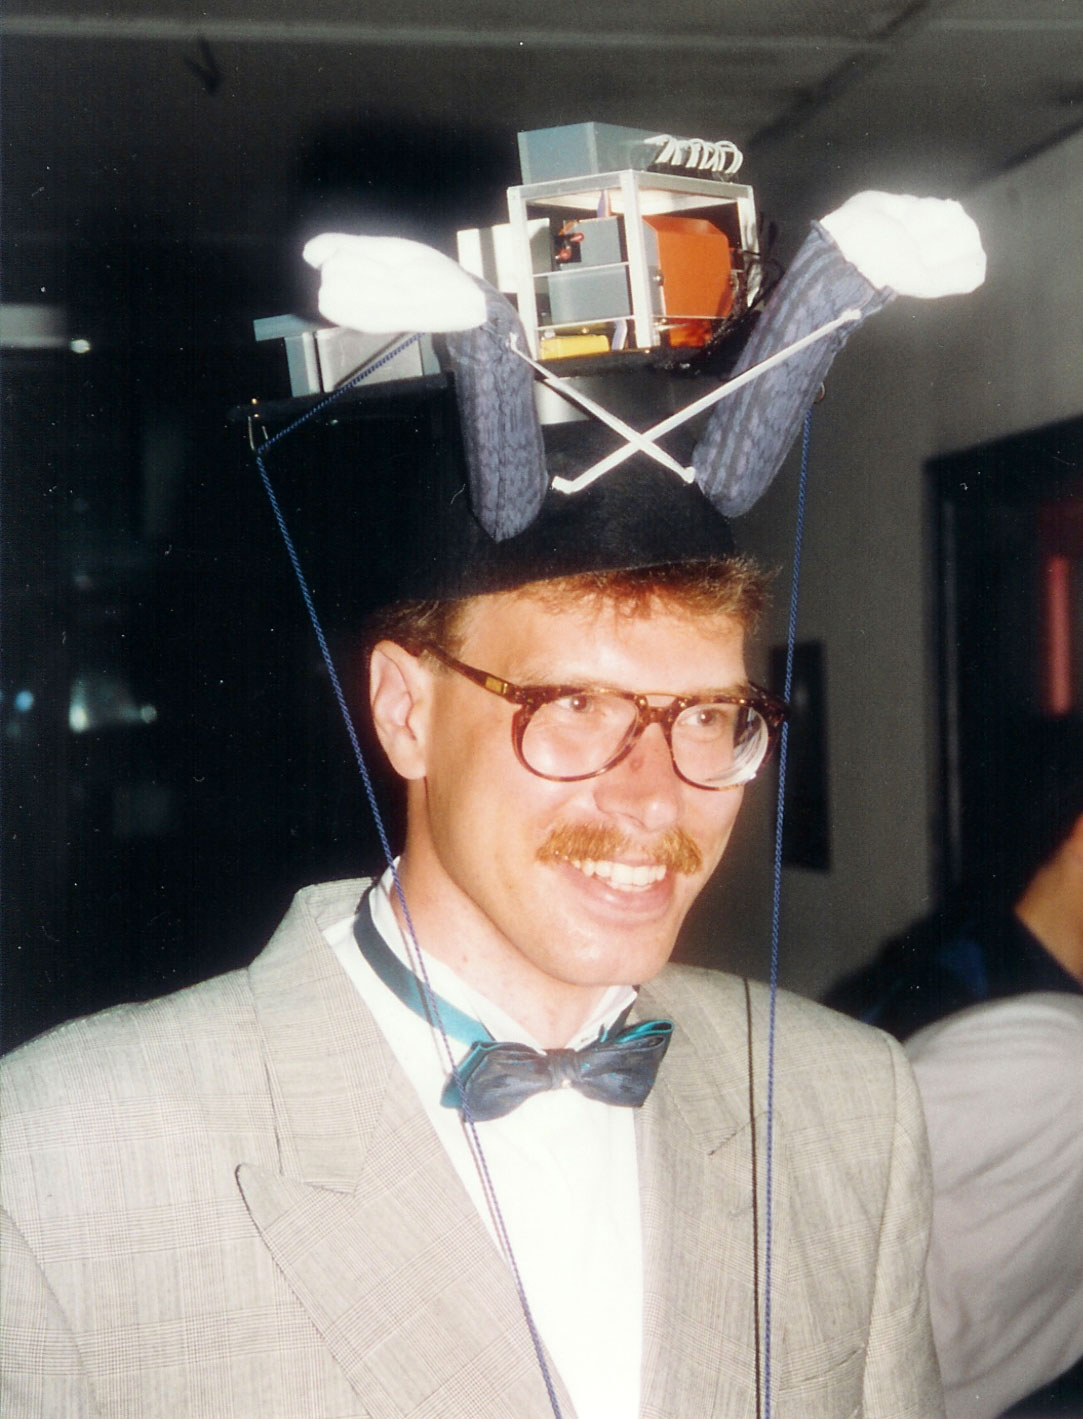 Andreas Tünnermann received a doctorate in 1992 from the Leibniz University Hannover.